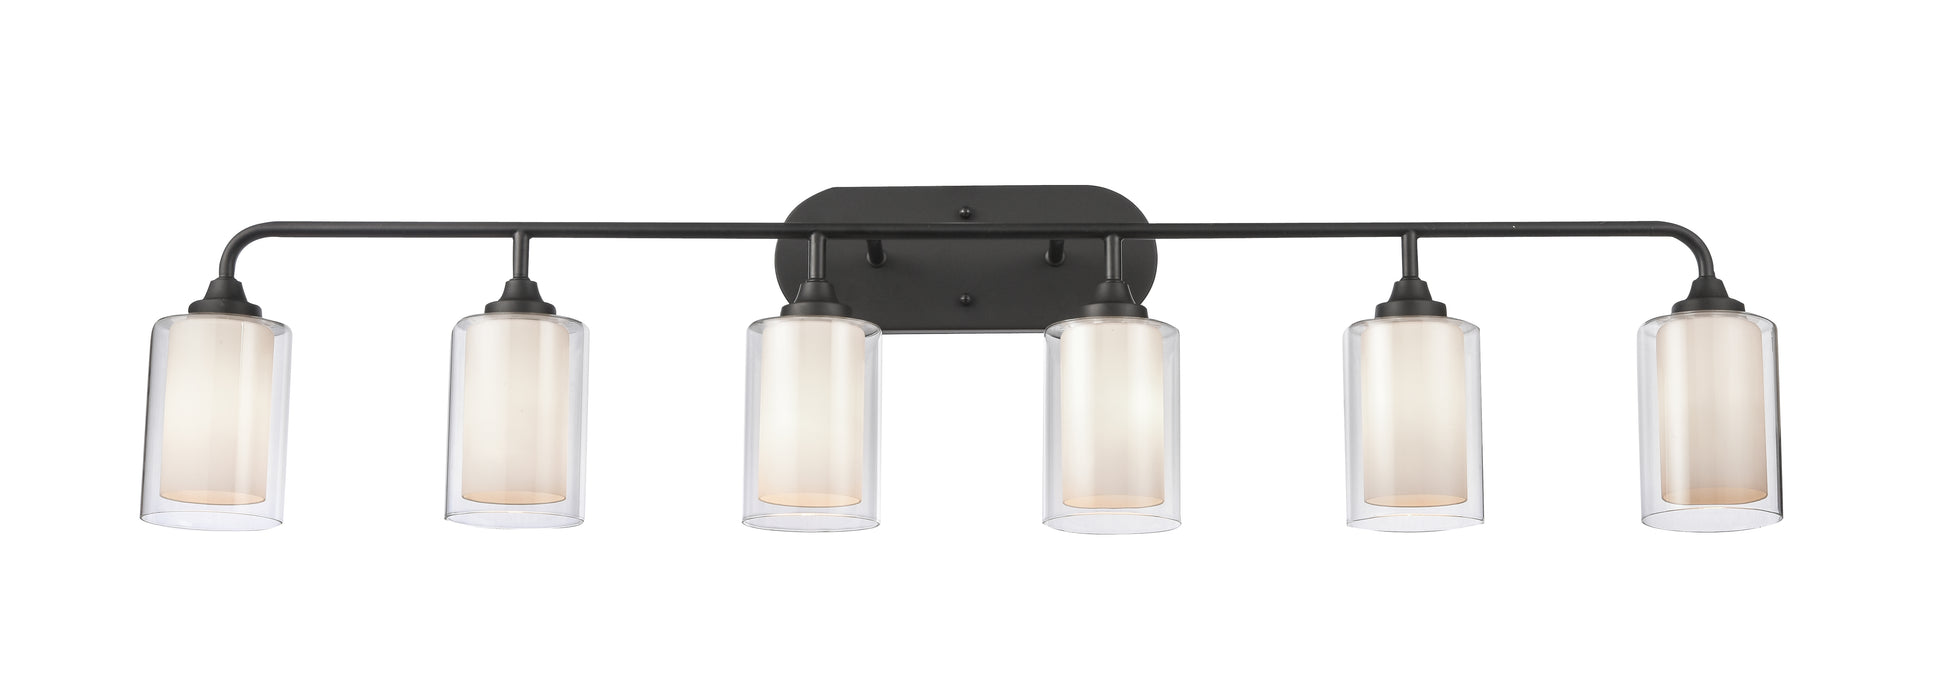 Fairbank Bath Vanity Light shown in the Matte Black finish with a White & Clear shade